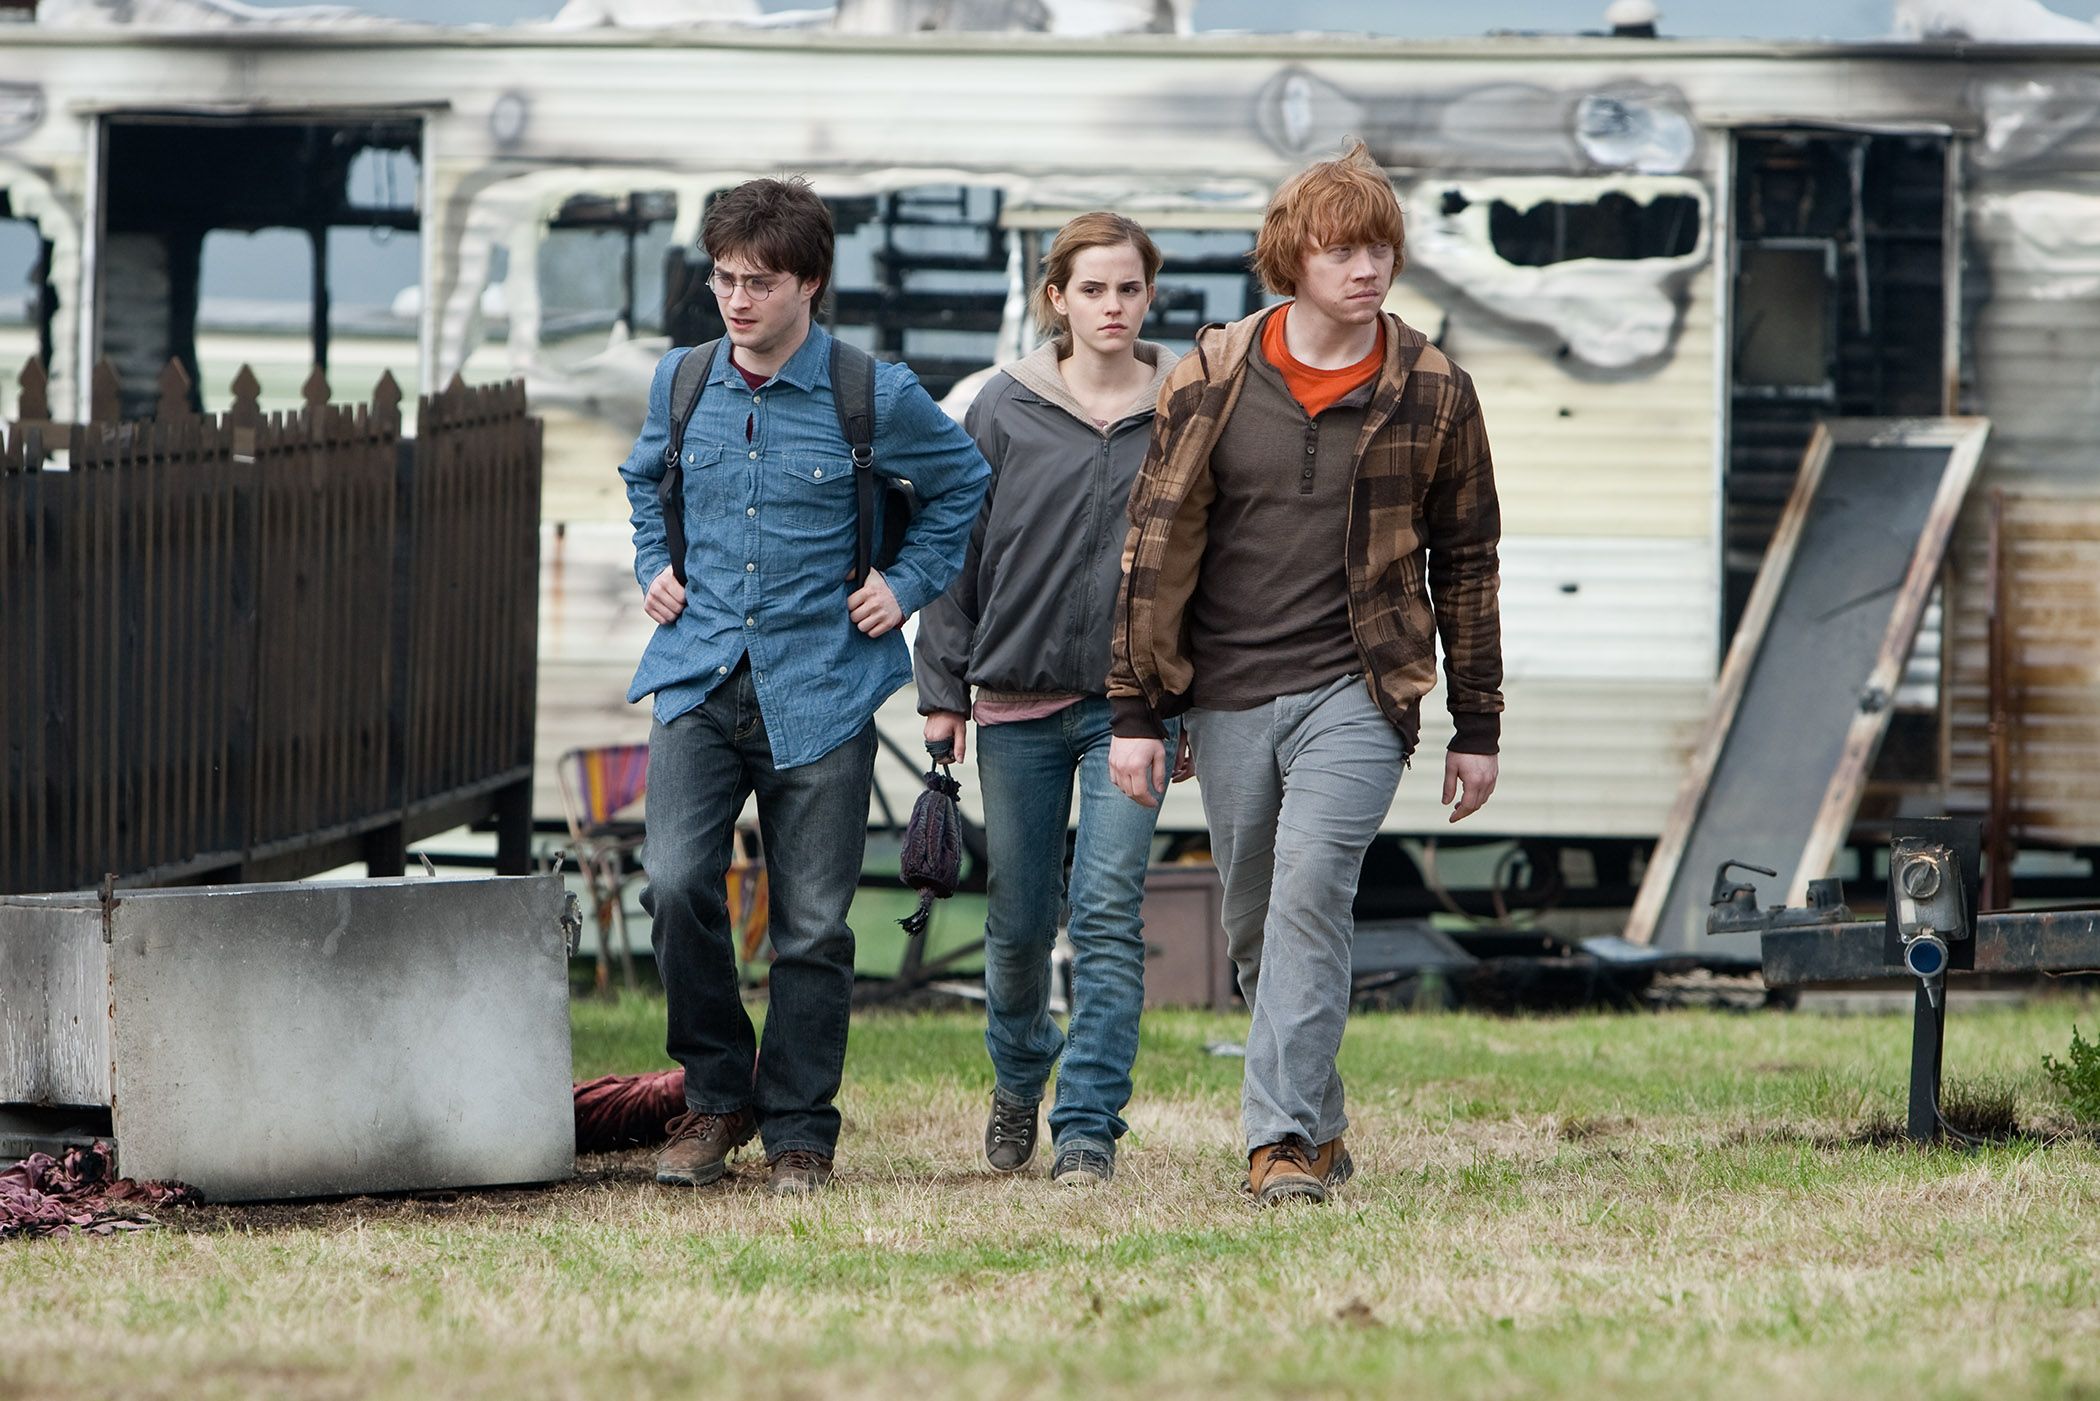 Daniel Radcliffe, Emma Watson and Rupert Grint in Harry Potter and the Deathly Hallows